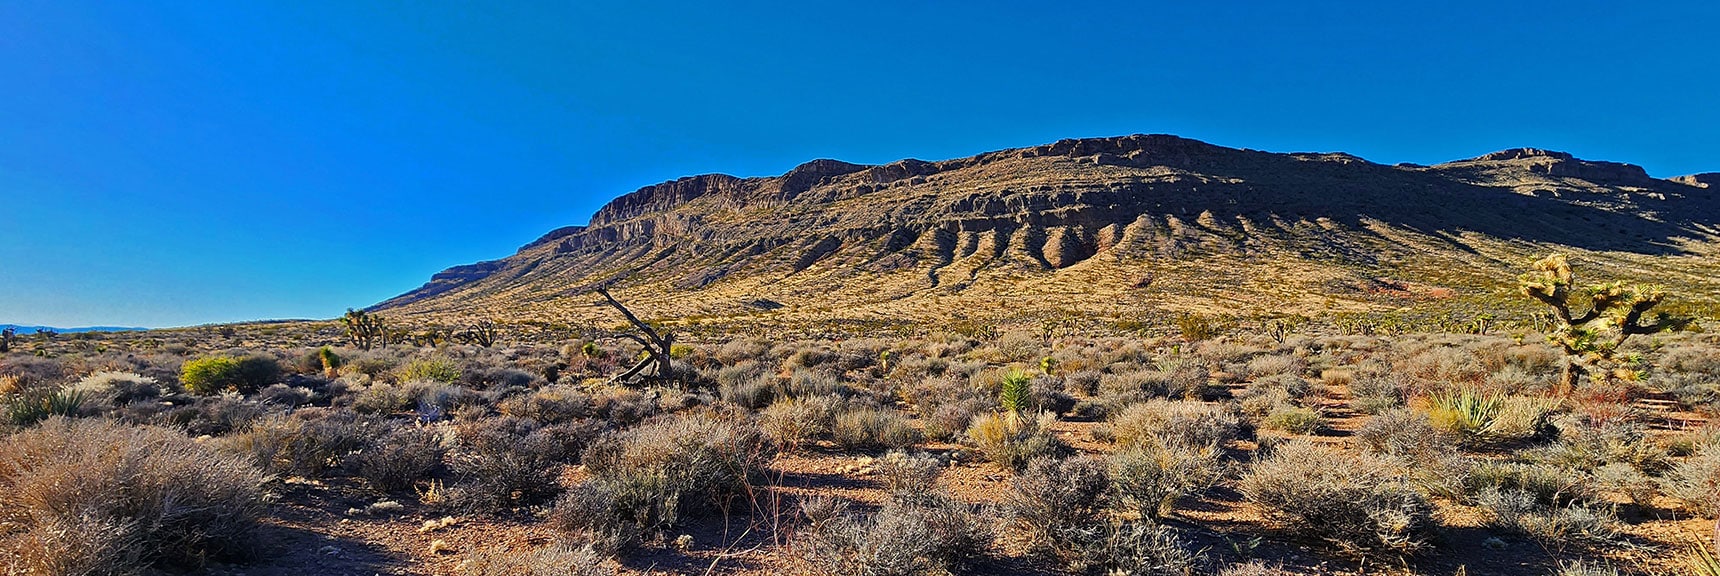 Bluff's Southeast Corner. Could Traverse Higher Up on Non Target Shooting Days. | Landmark Bluff Circuit | Lovell Canyon, Nevada